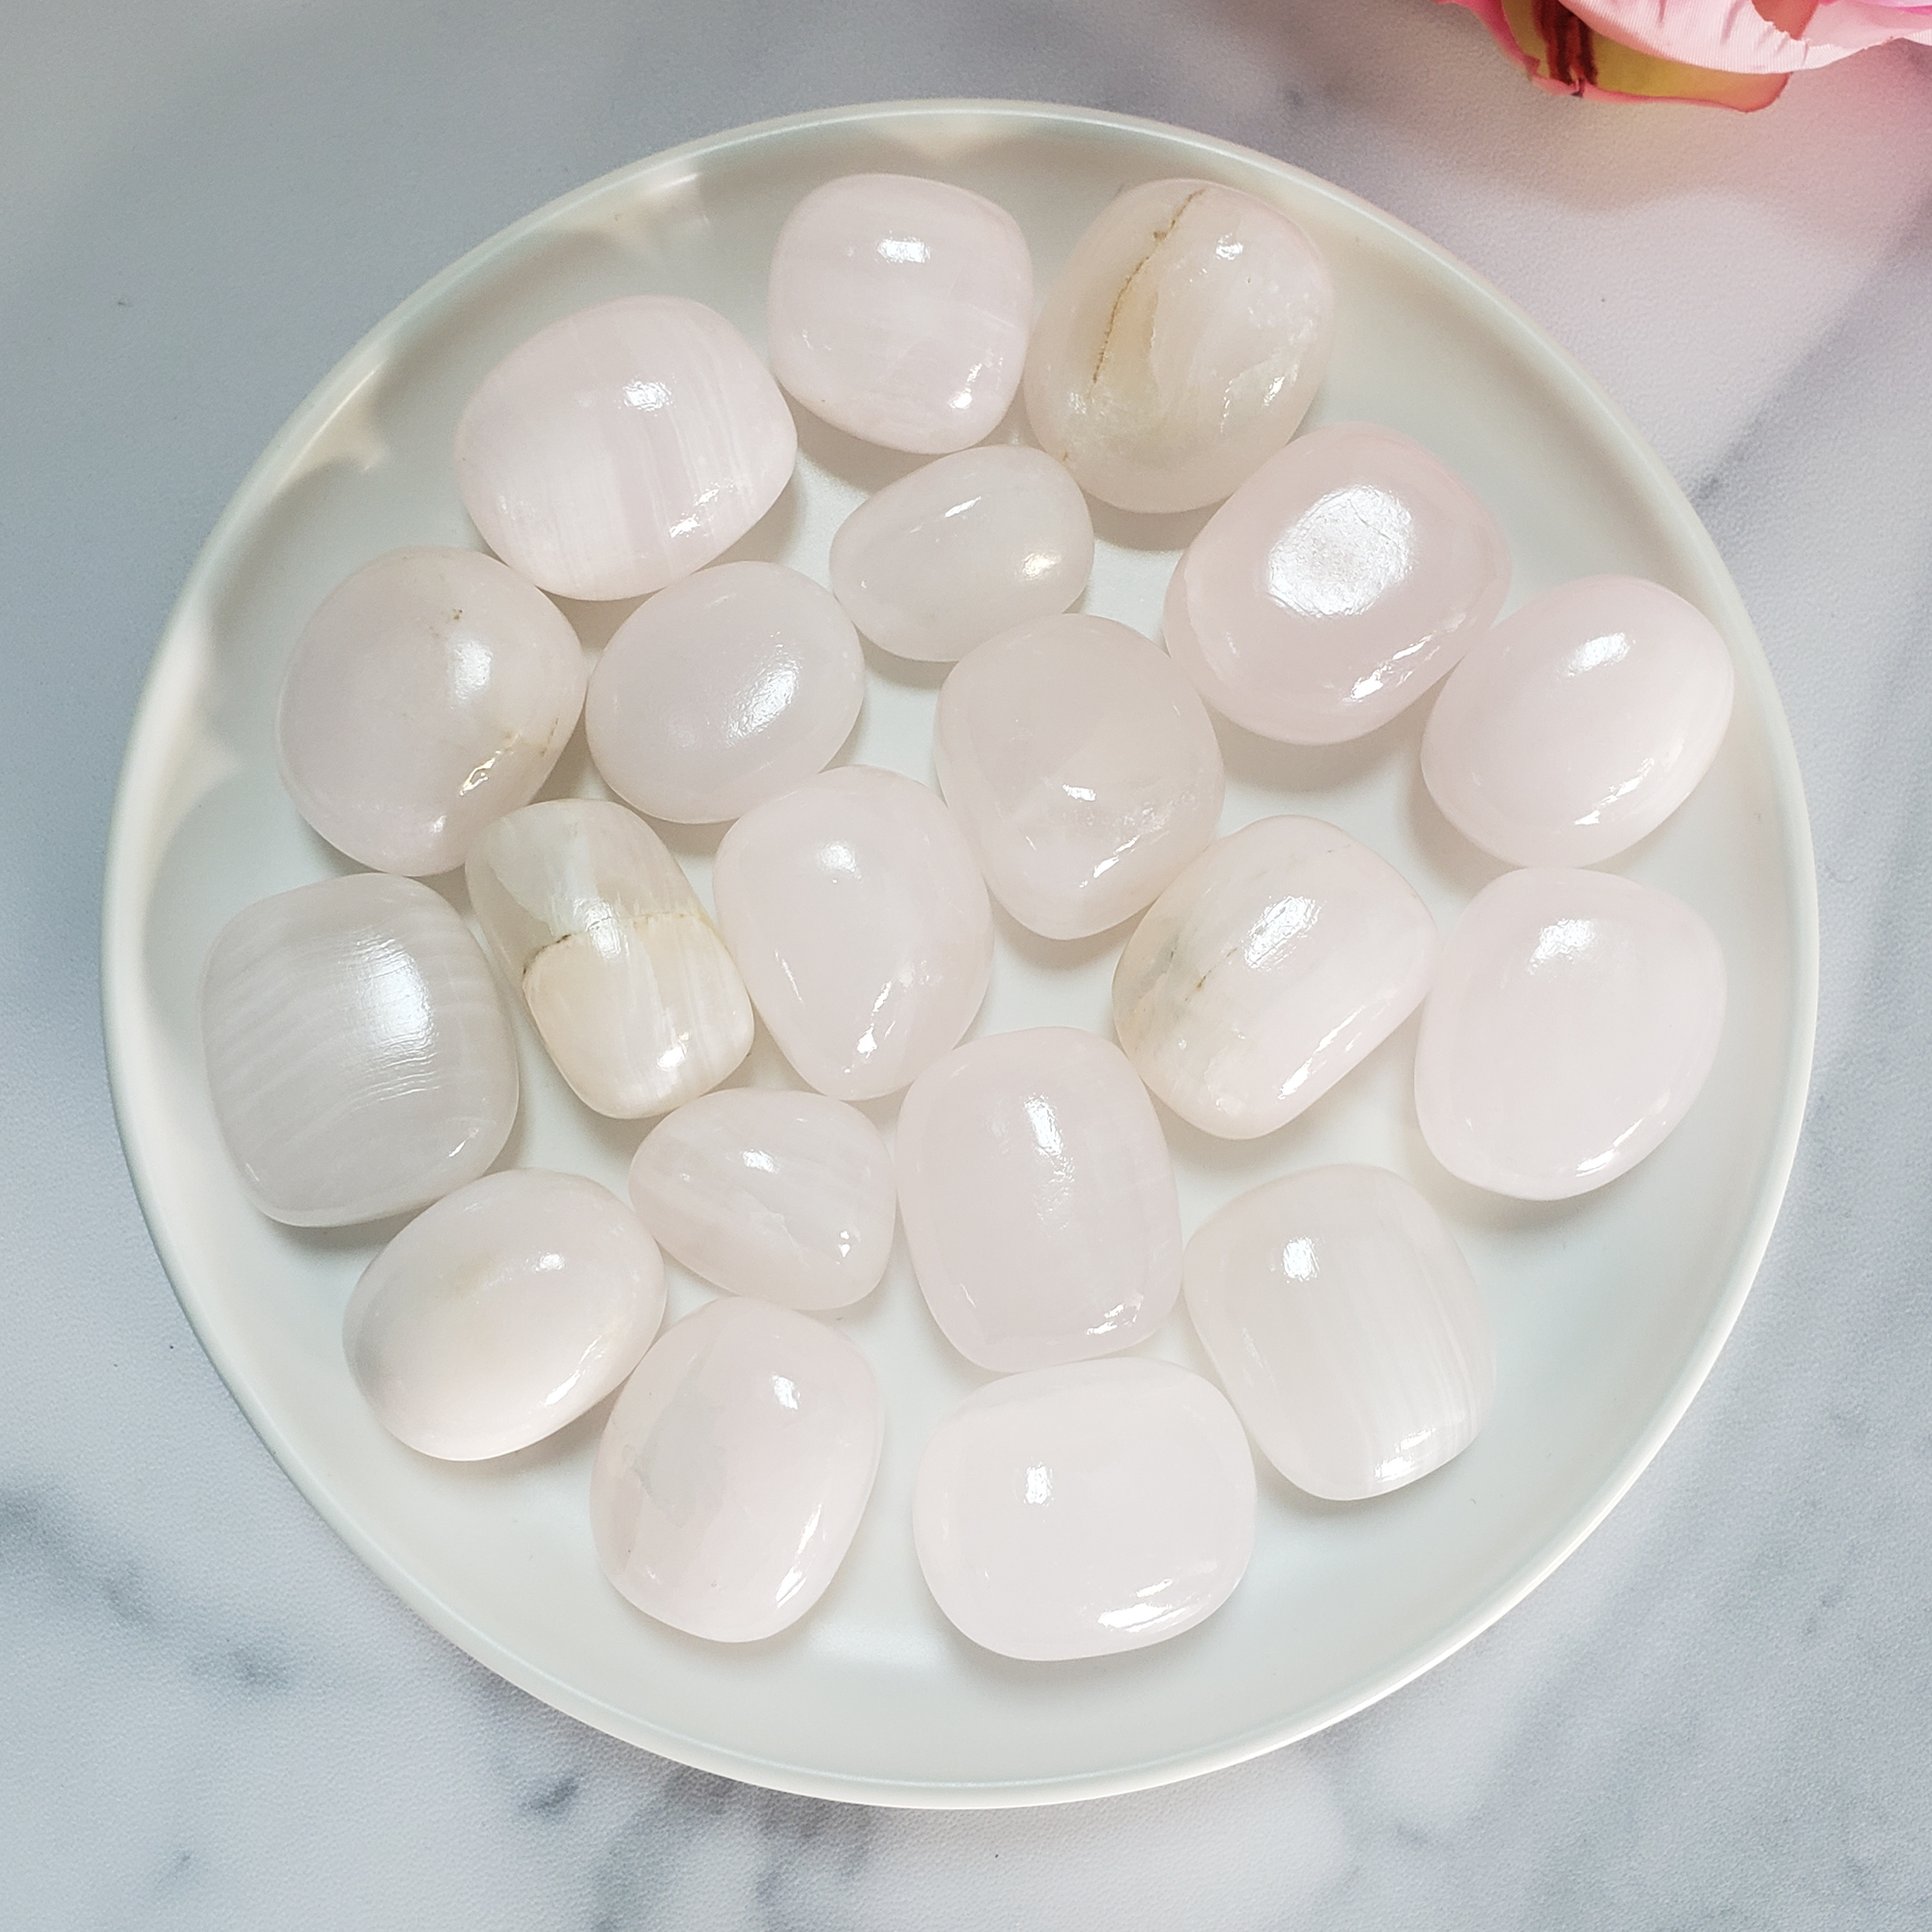 Pearl Pink Calcite Crystal Natural Tumbled Stone - Pastel Pink Calcite Polished Stones in White Ceramic Dish